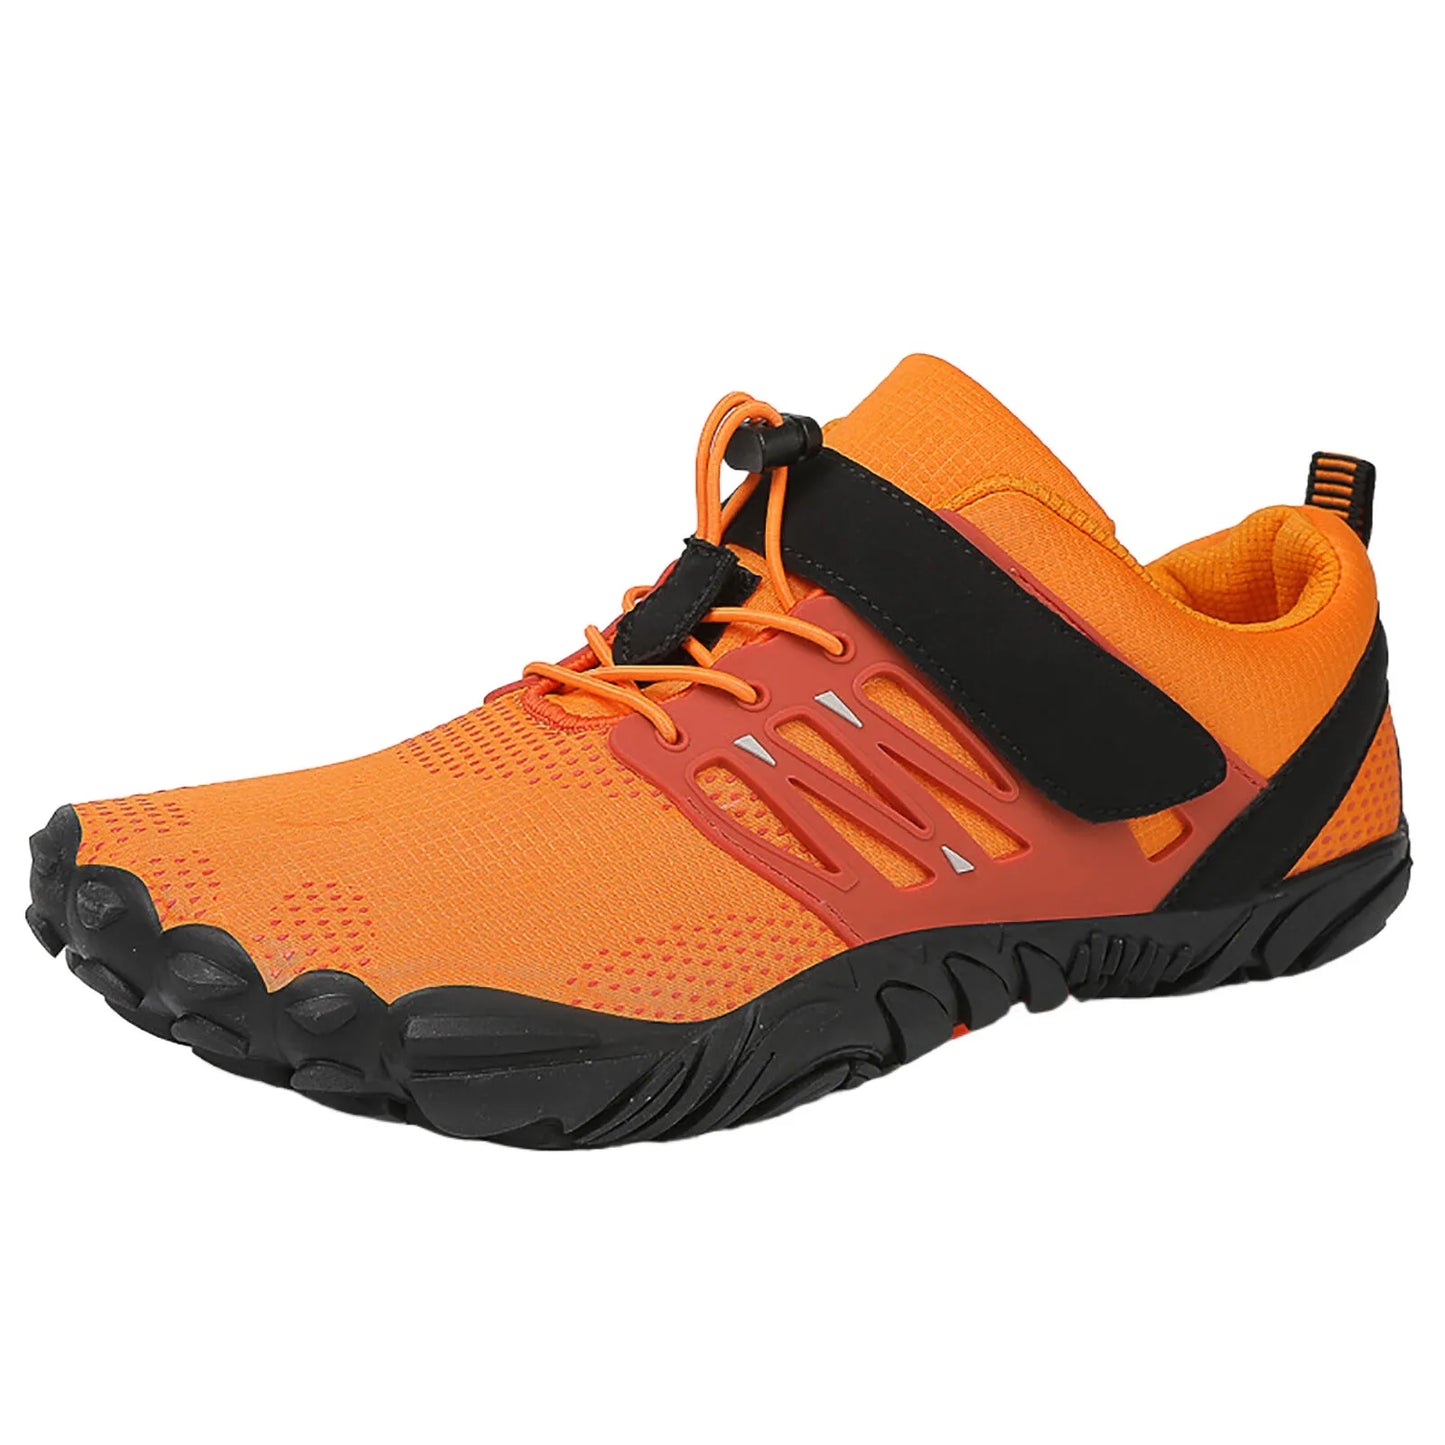 New Outdoor Mountaineering Shoes For Men/Non Slip Hiking Sports Hiking Shoes Breathable